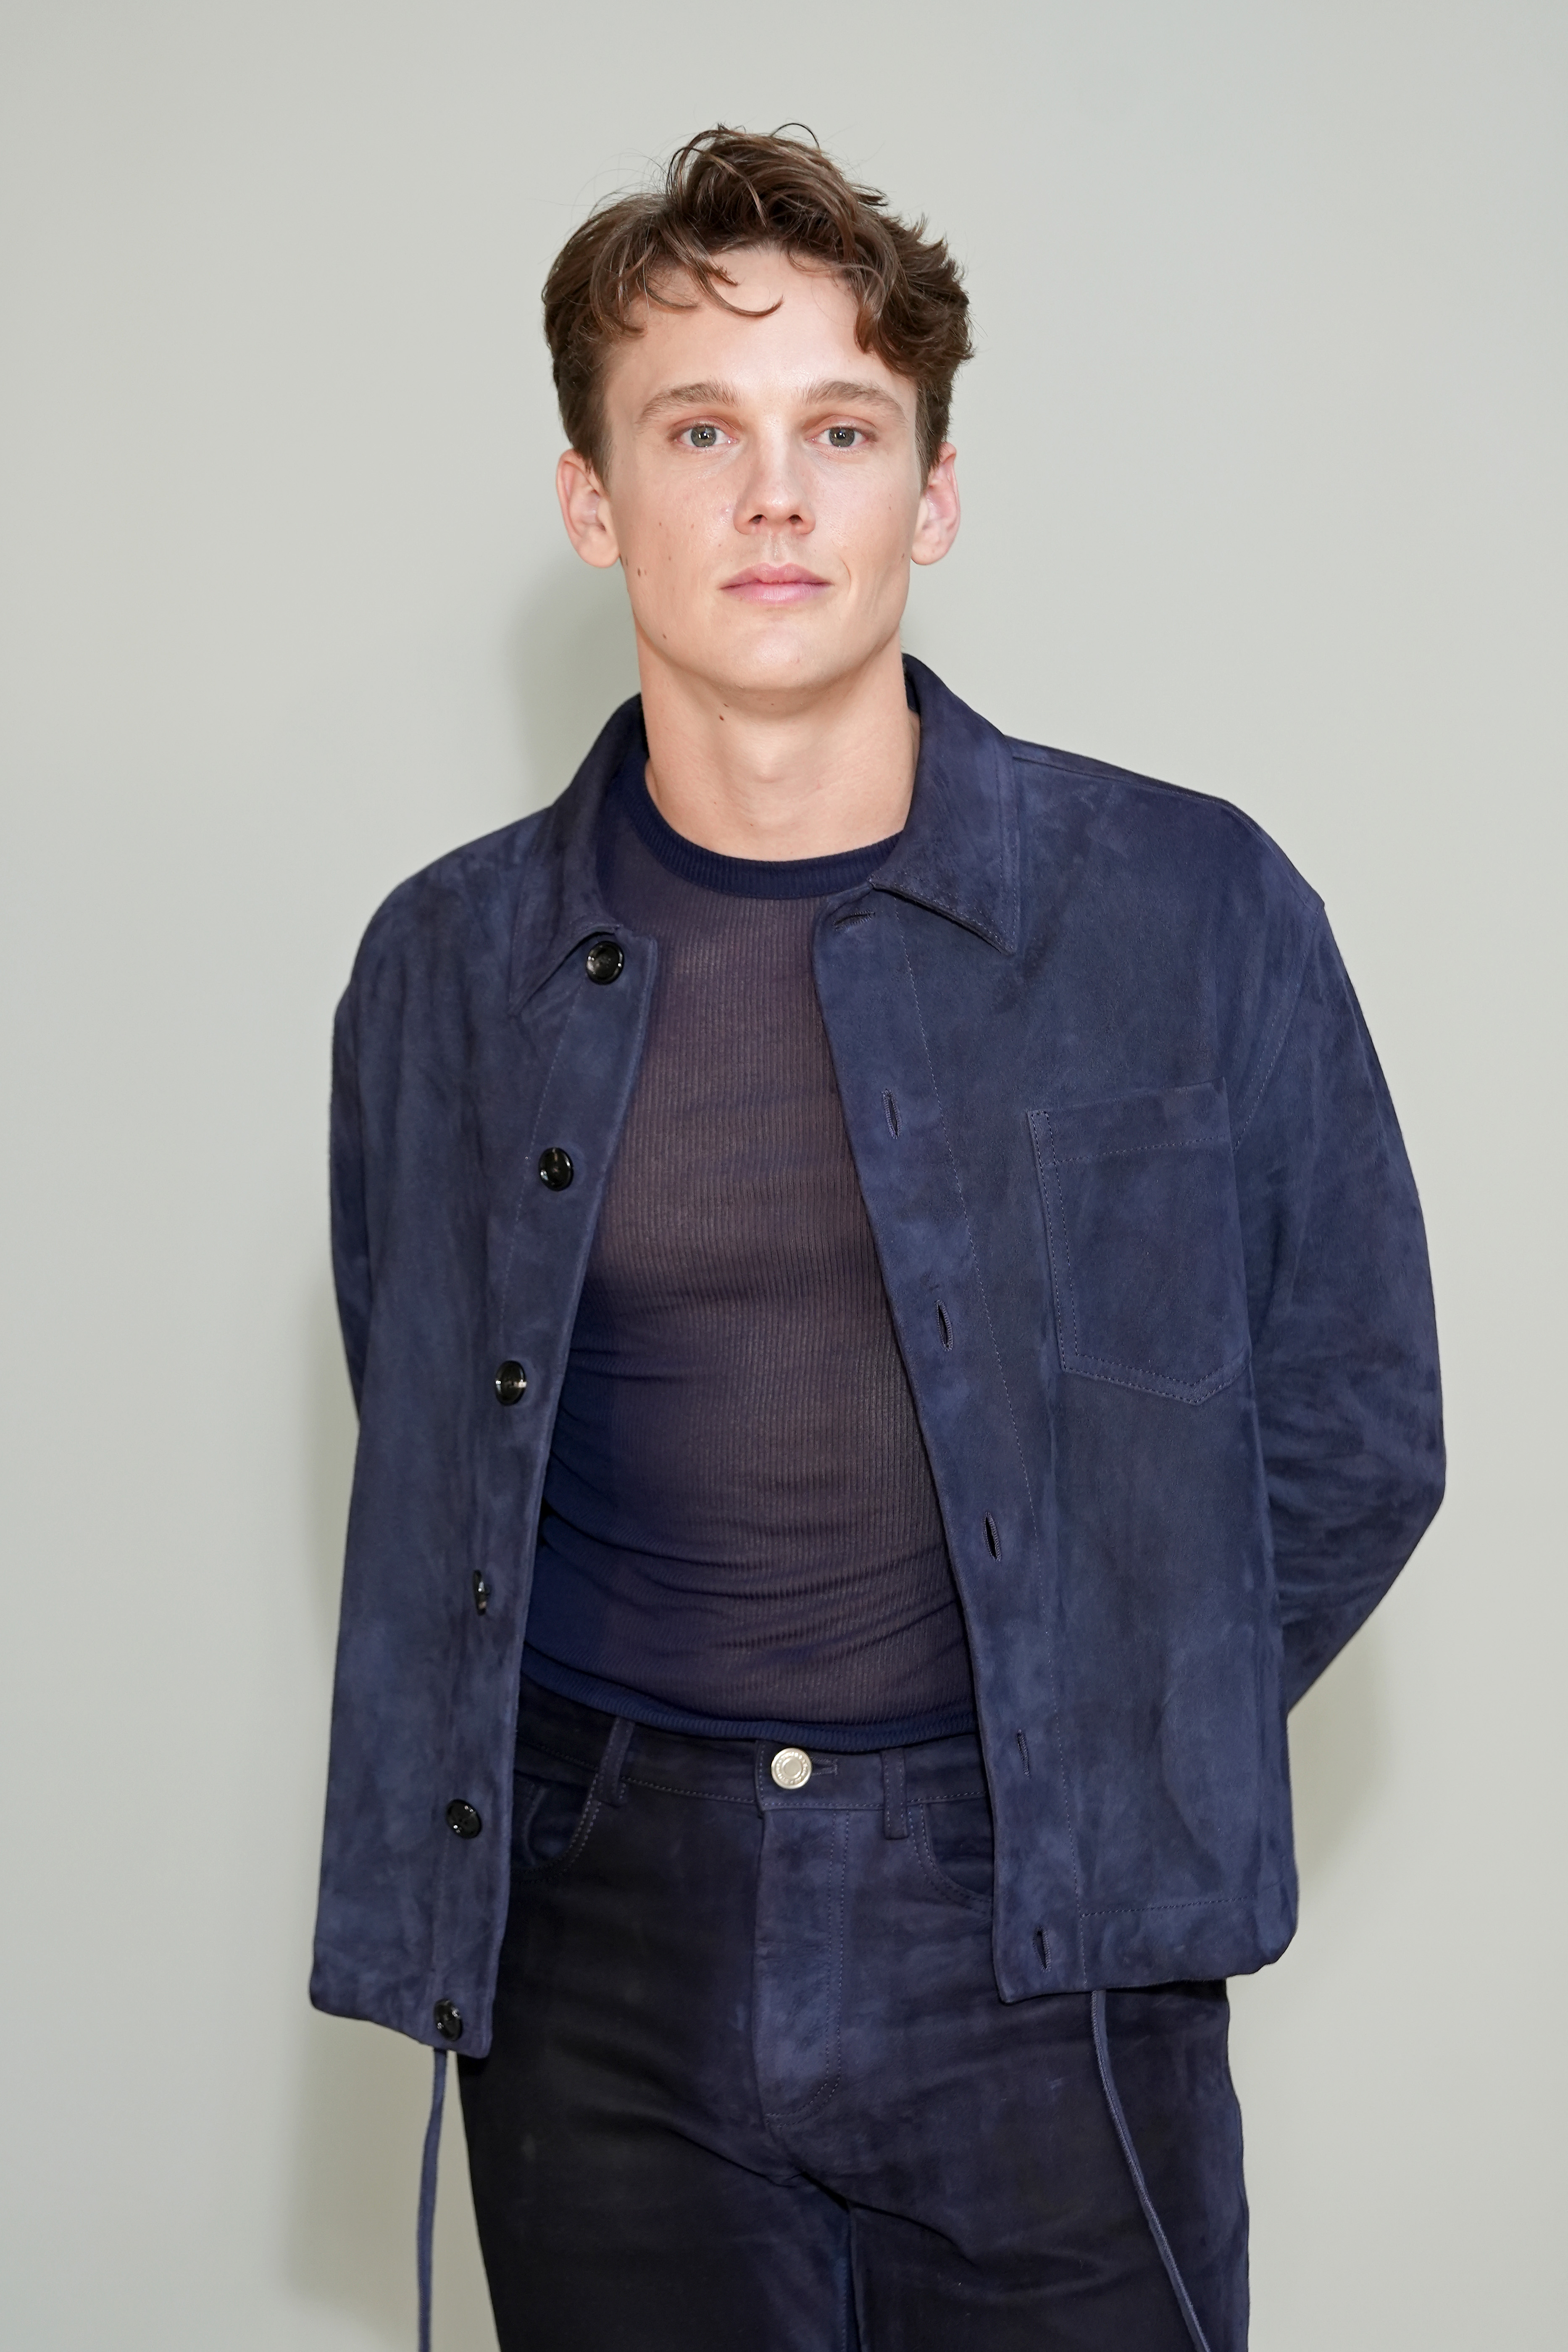 Hunter Doohan at the e Ami Alexandre Mattiussi Menswear Spring/Summer 2024 show during Paris Fashion Week on June 22, 2023, in Paris, France. | Source: Getty Images